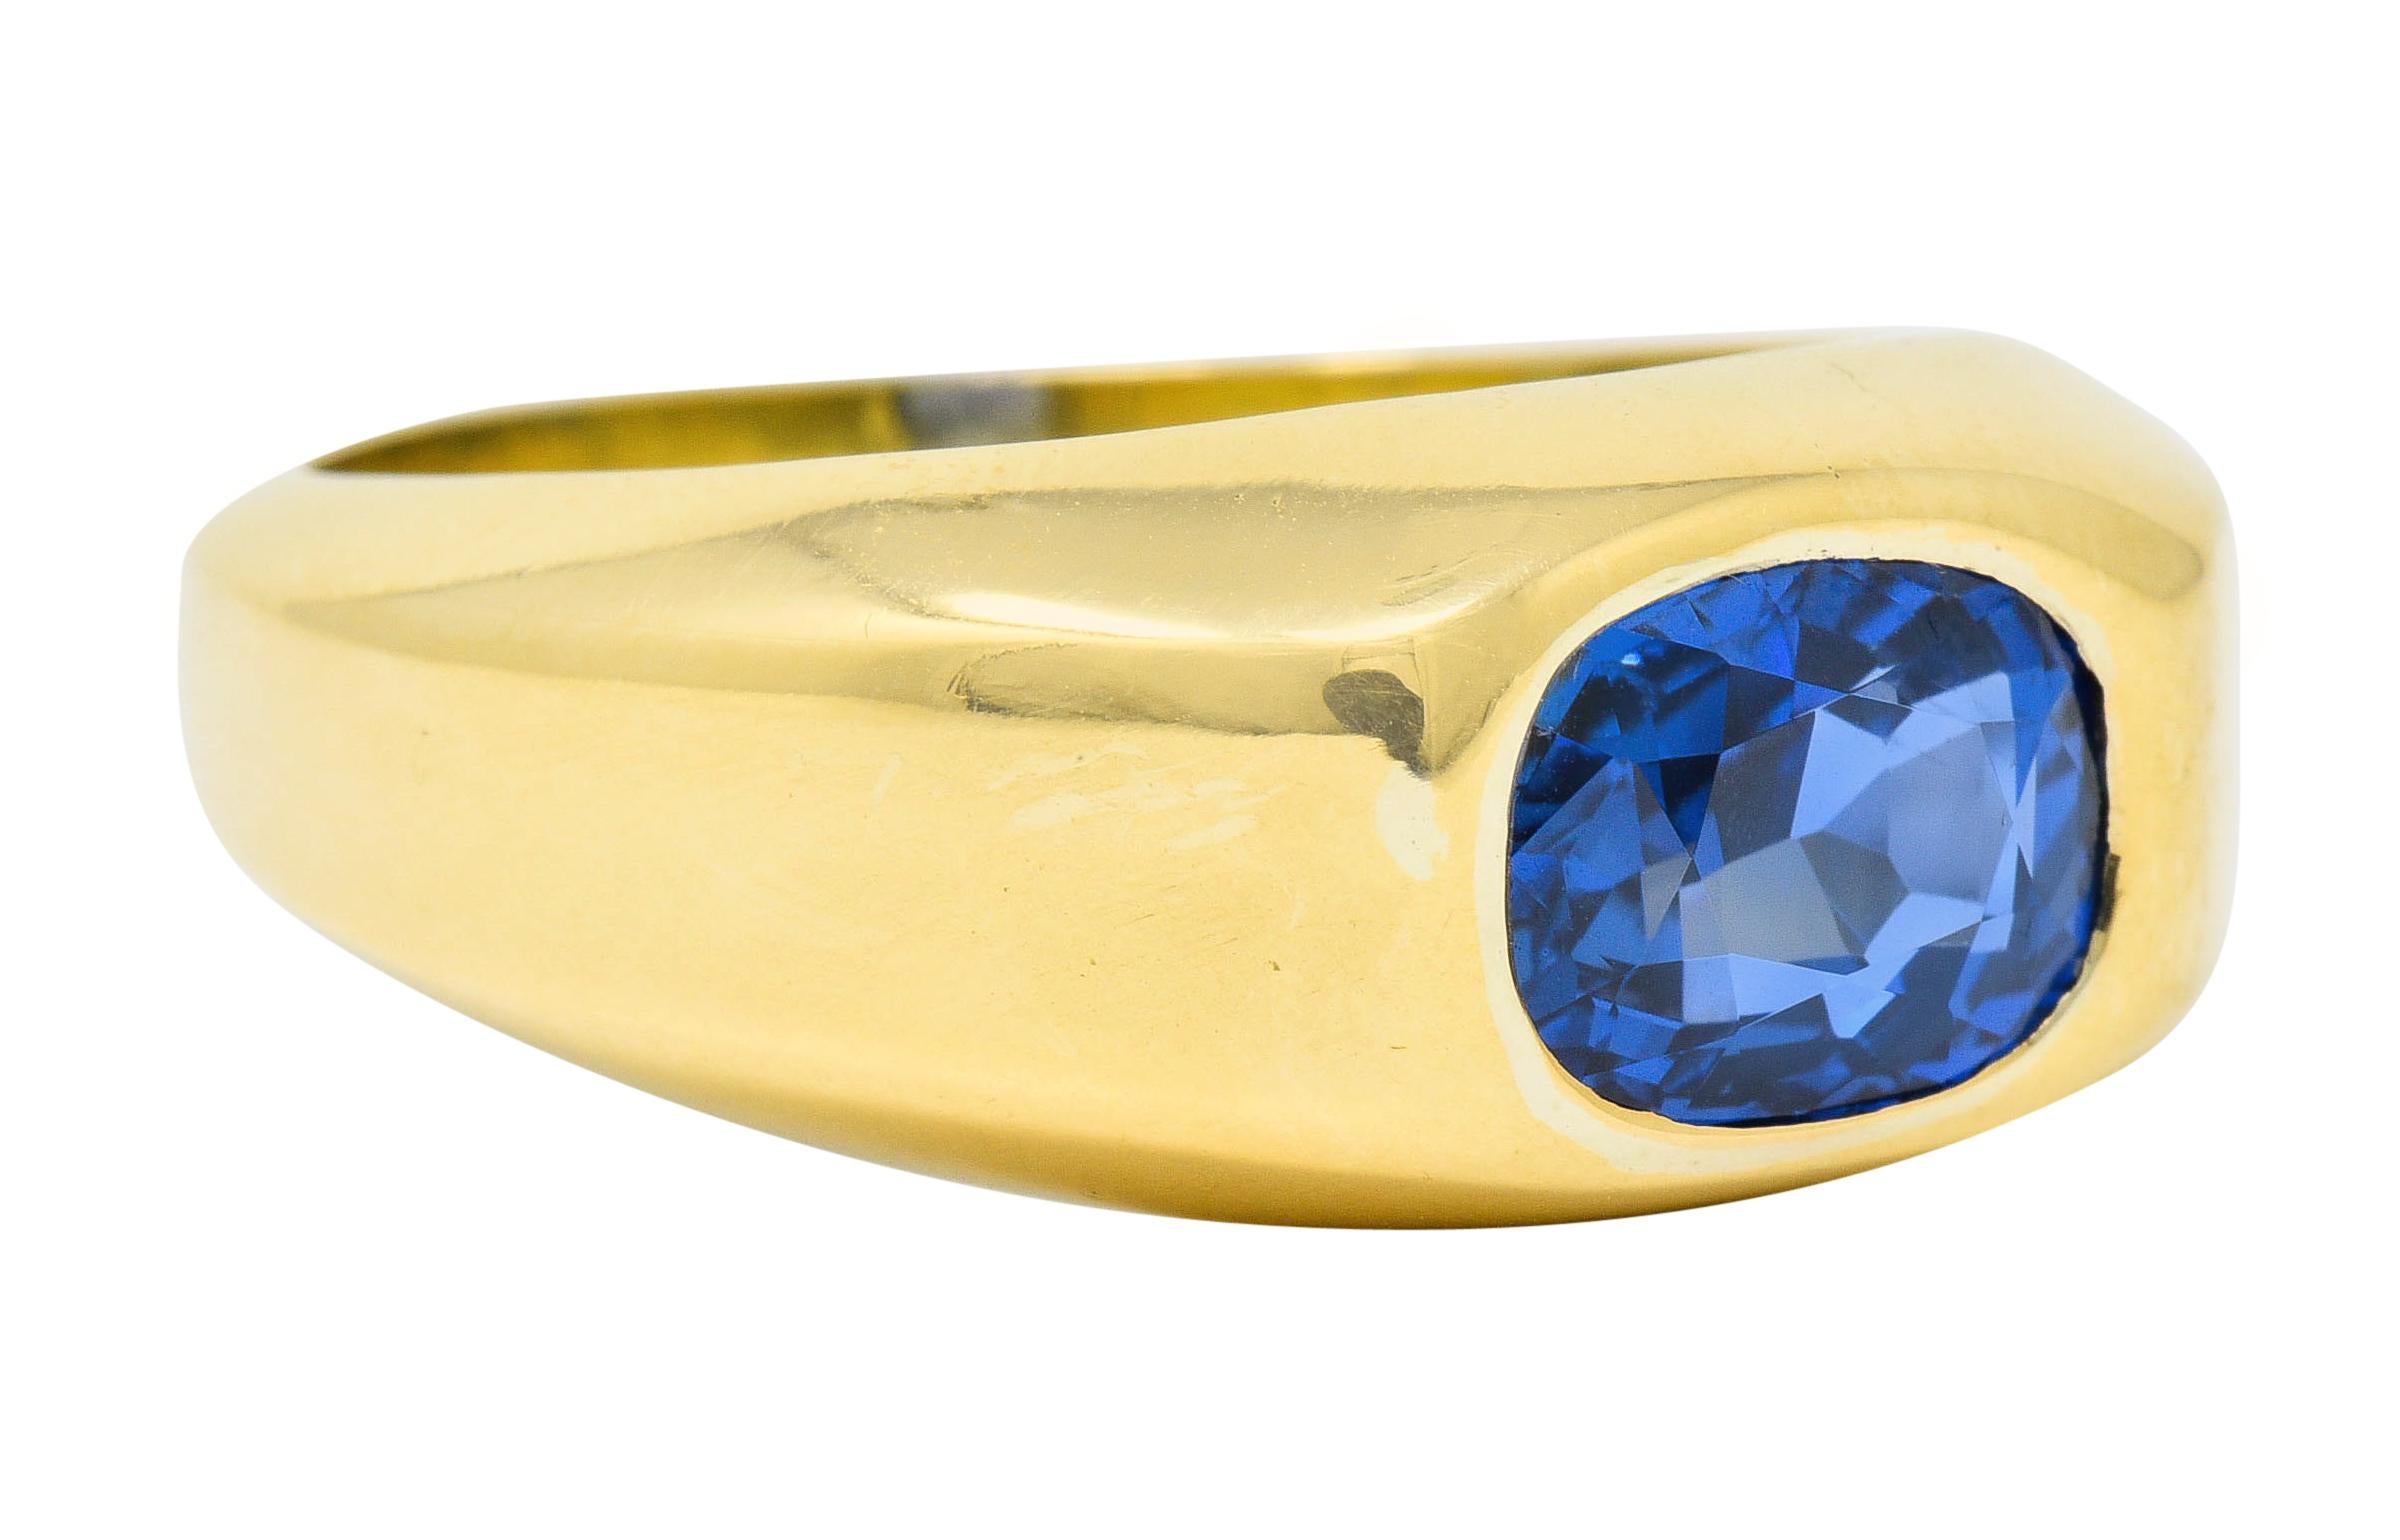 Signet style band ring with a high polished finish

Bezel set with an oval cut sapphire weighing approximately 2.85 carats

Transparent and medium-dark cornflower blue in color

Signed Tiffany & Schlumberger

Stamped 18K for 18 karat gold

French